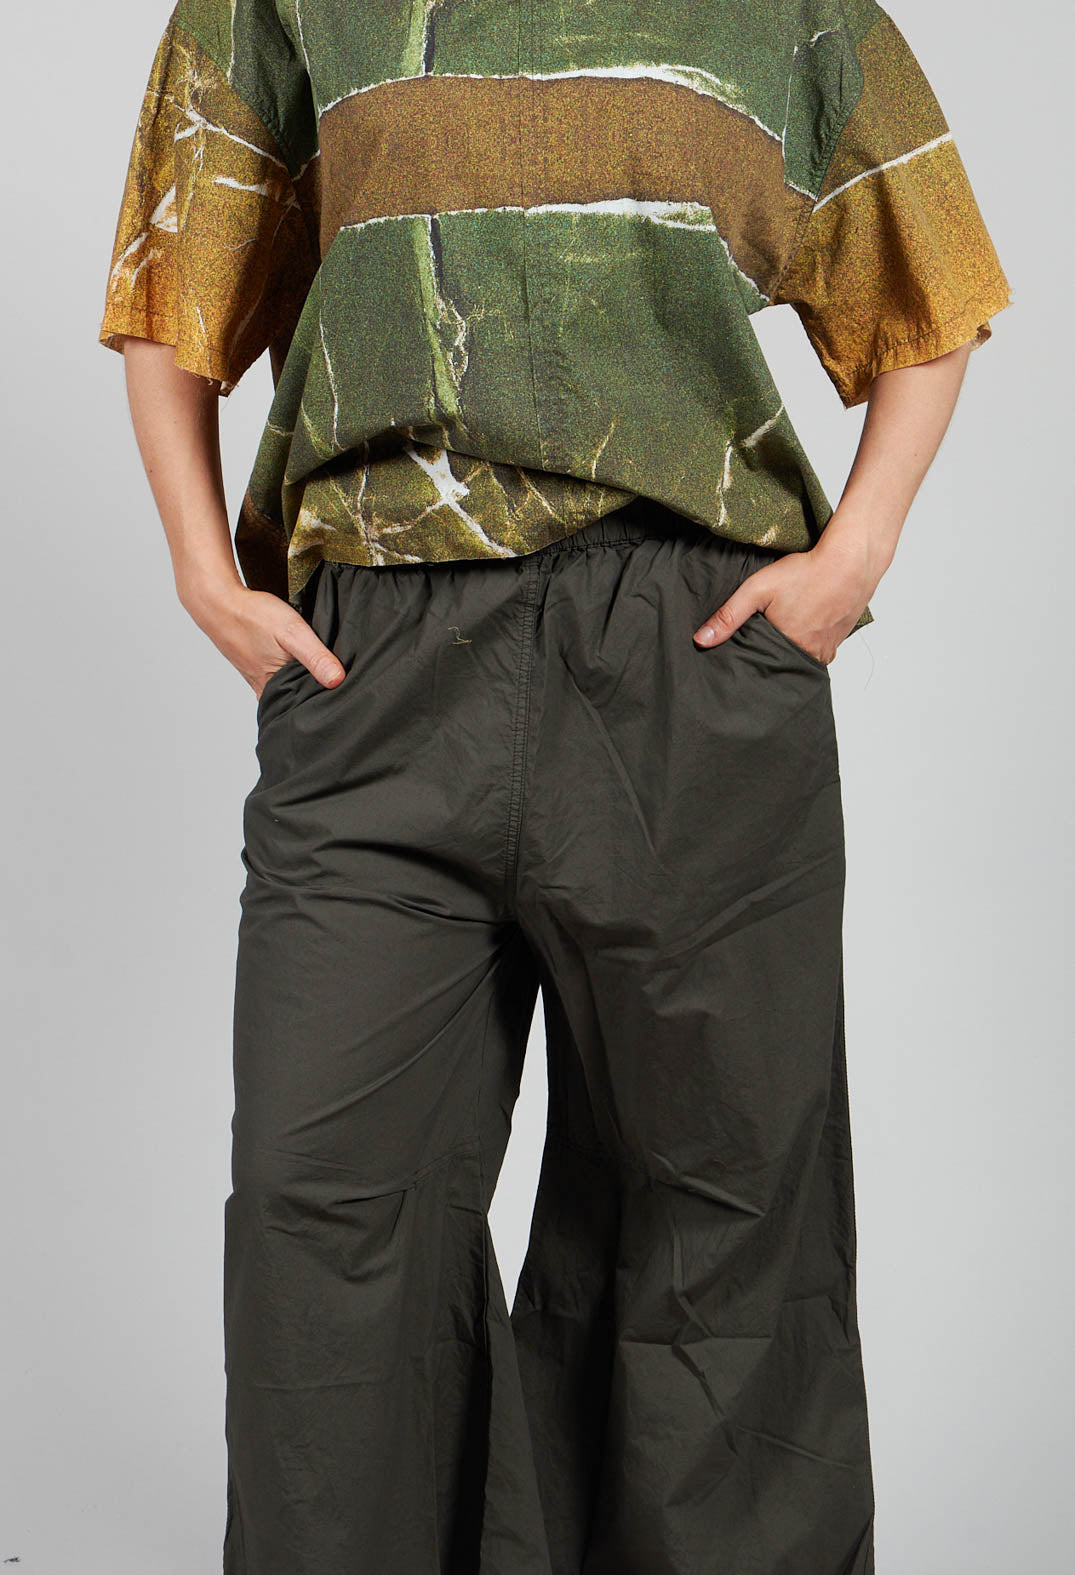 Mismo Trousers in Tea Leaf